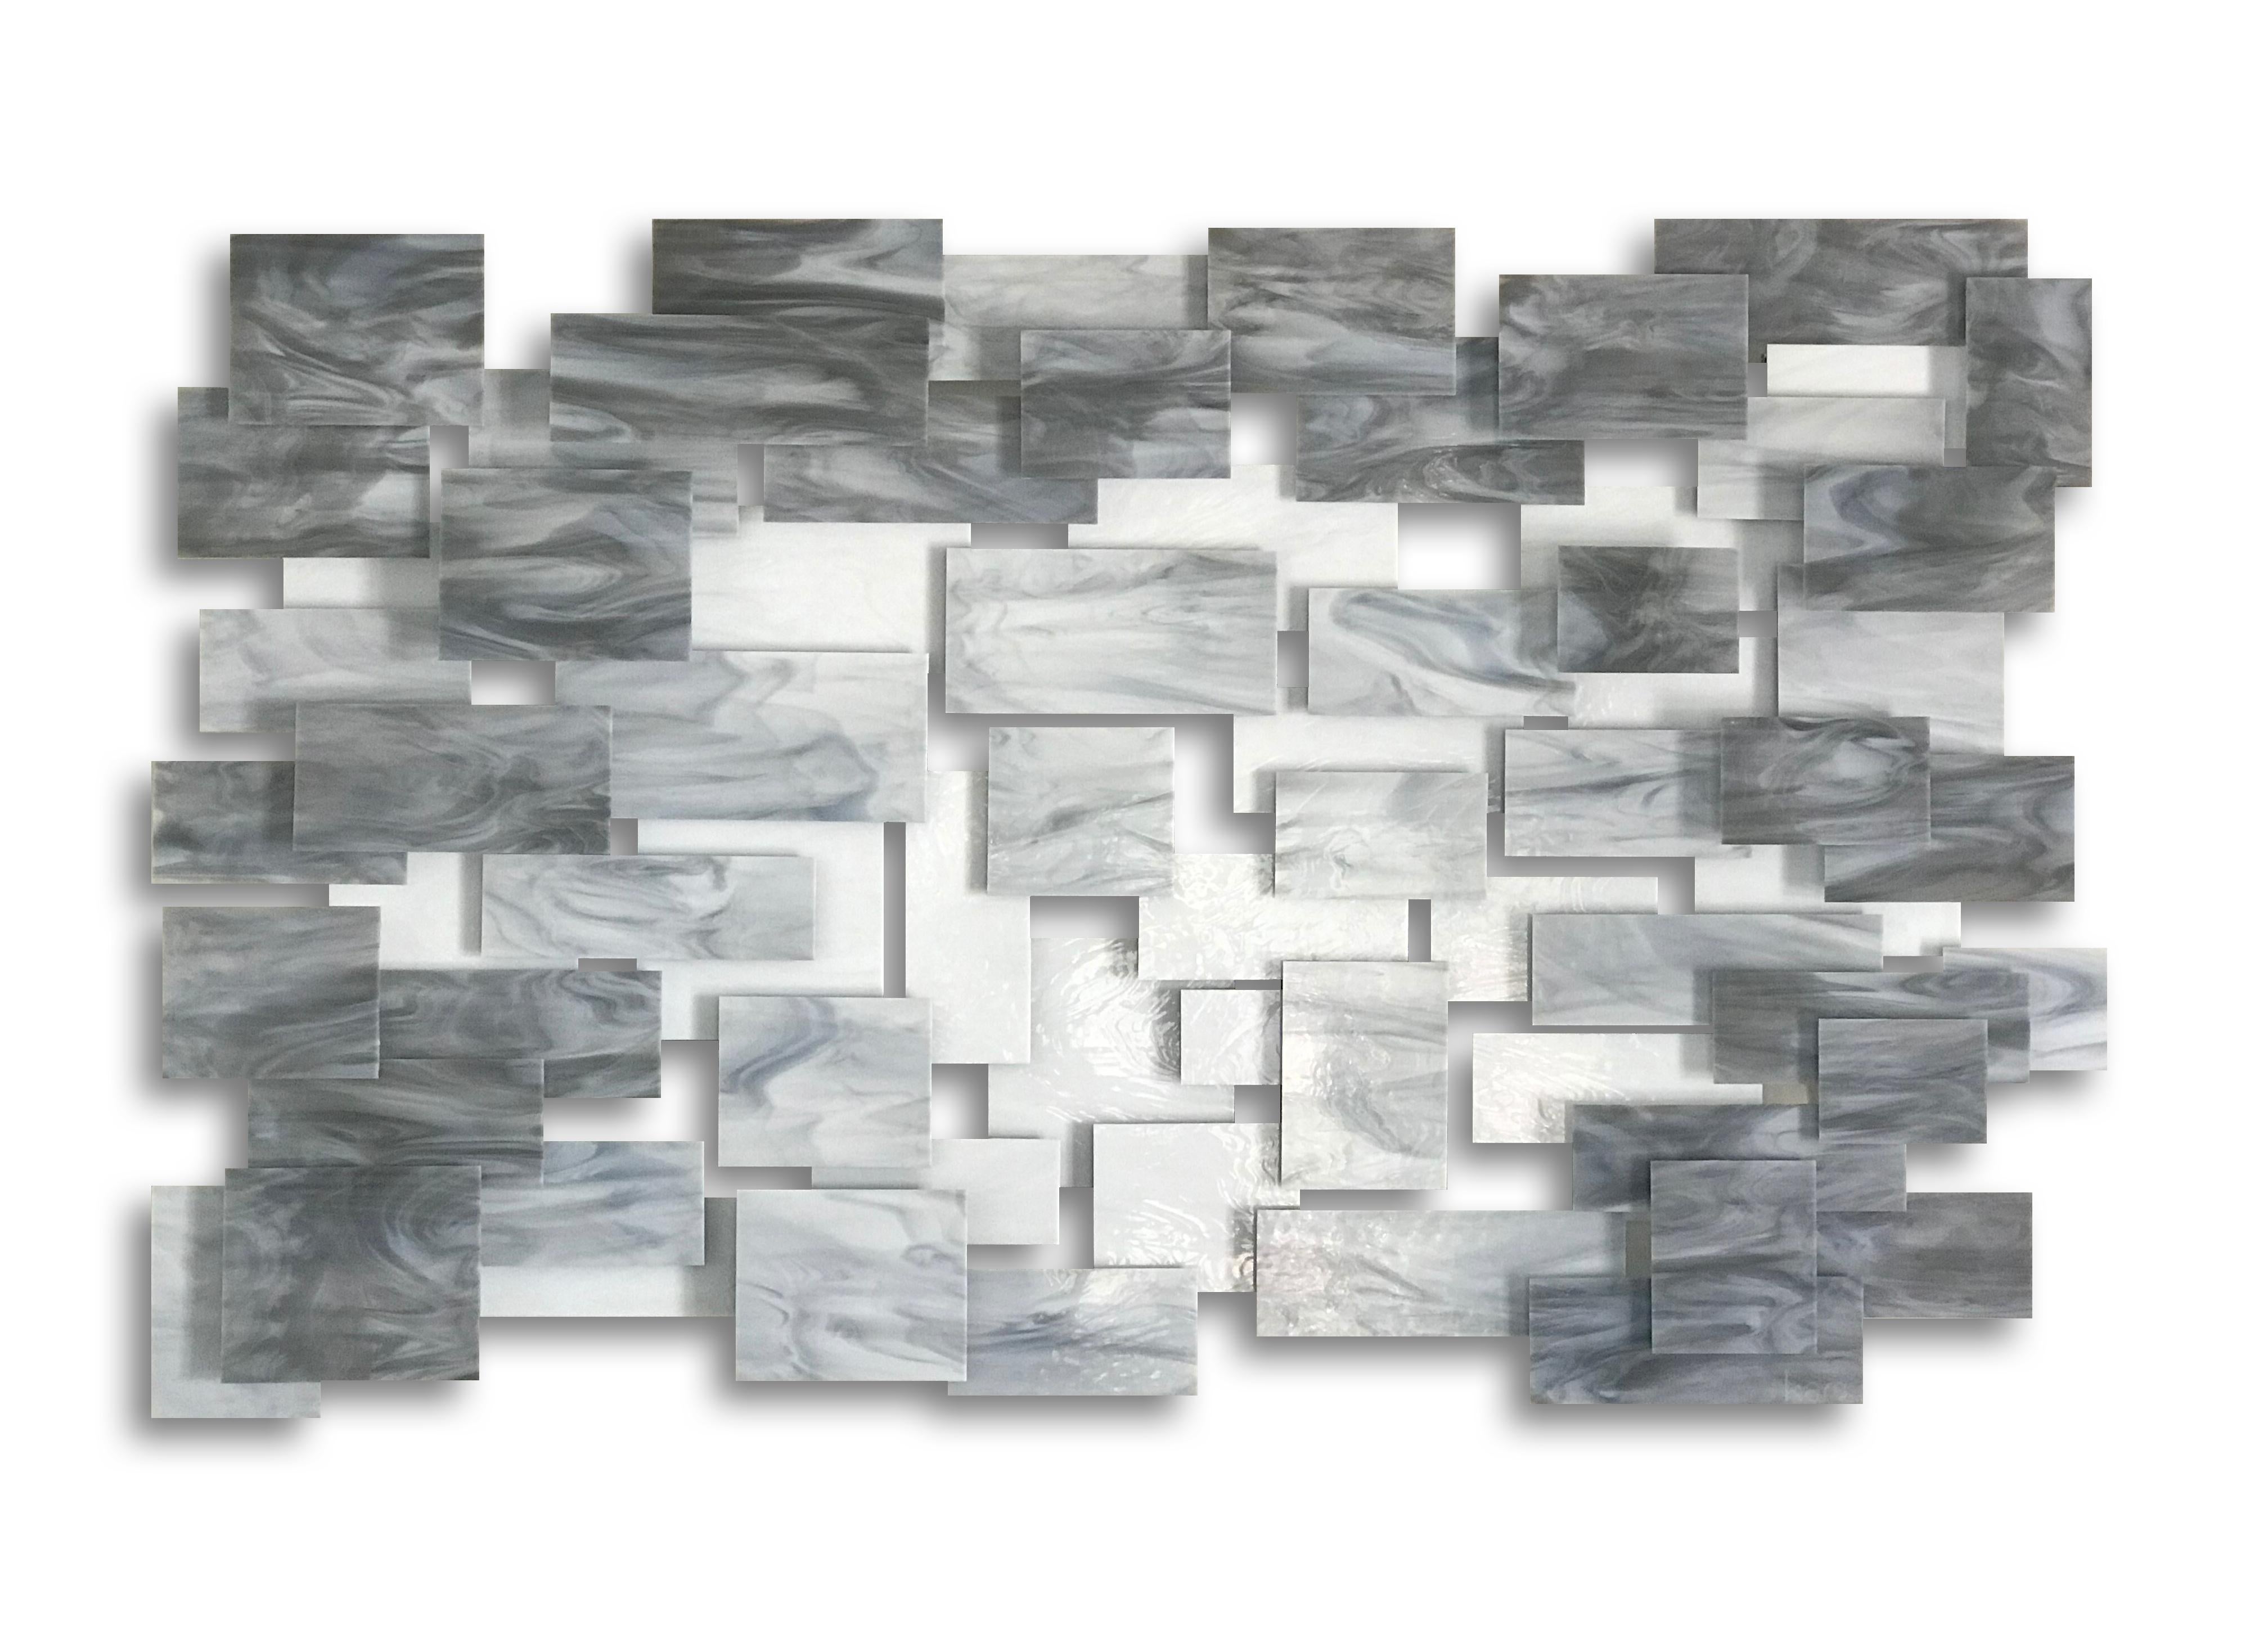 Monochrome, Abstract 3D, Original Glass and Metal Wall Sculpture